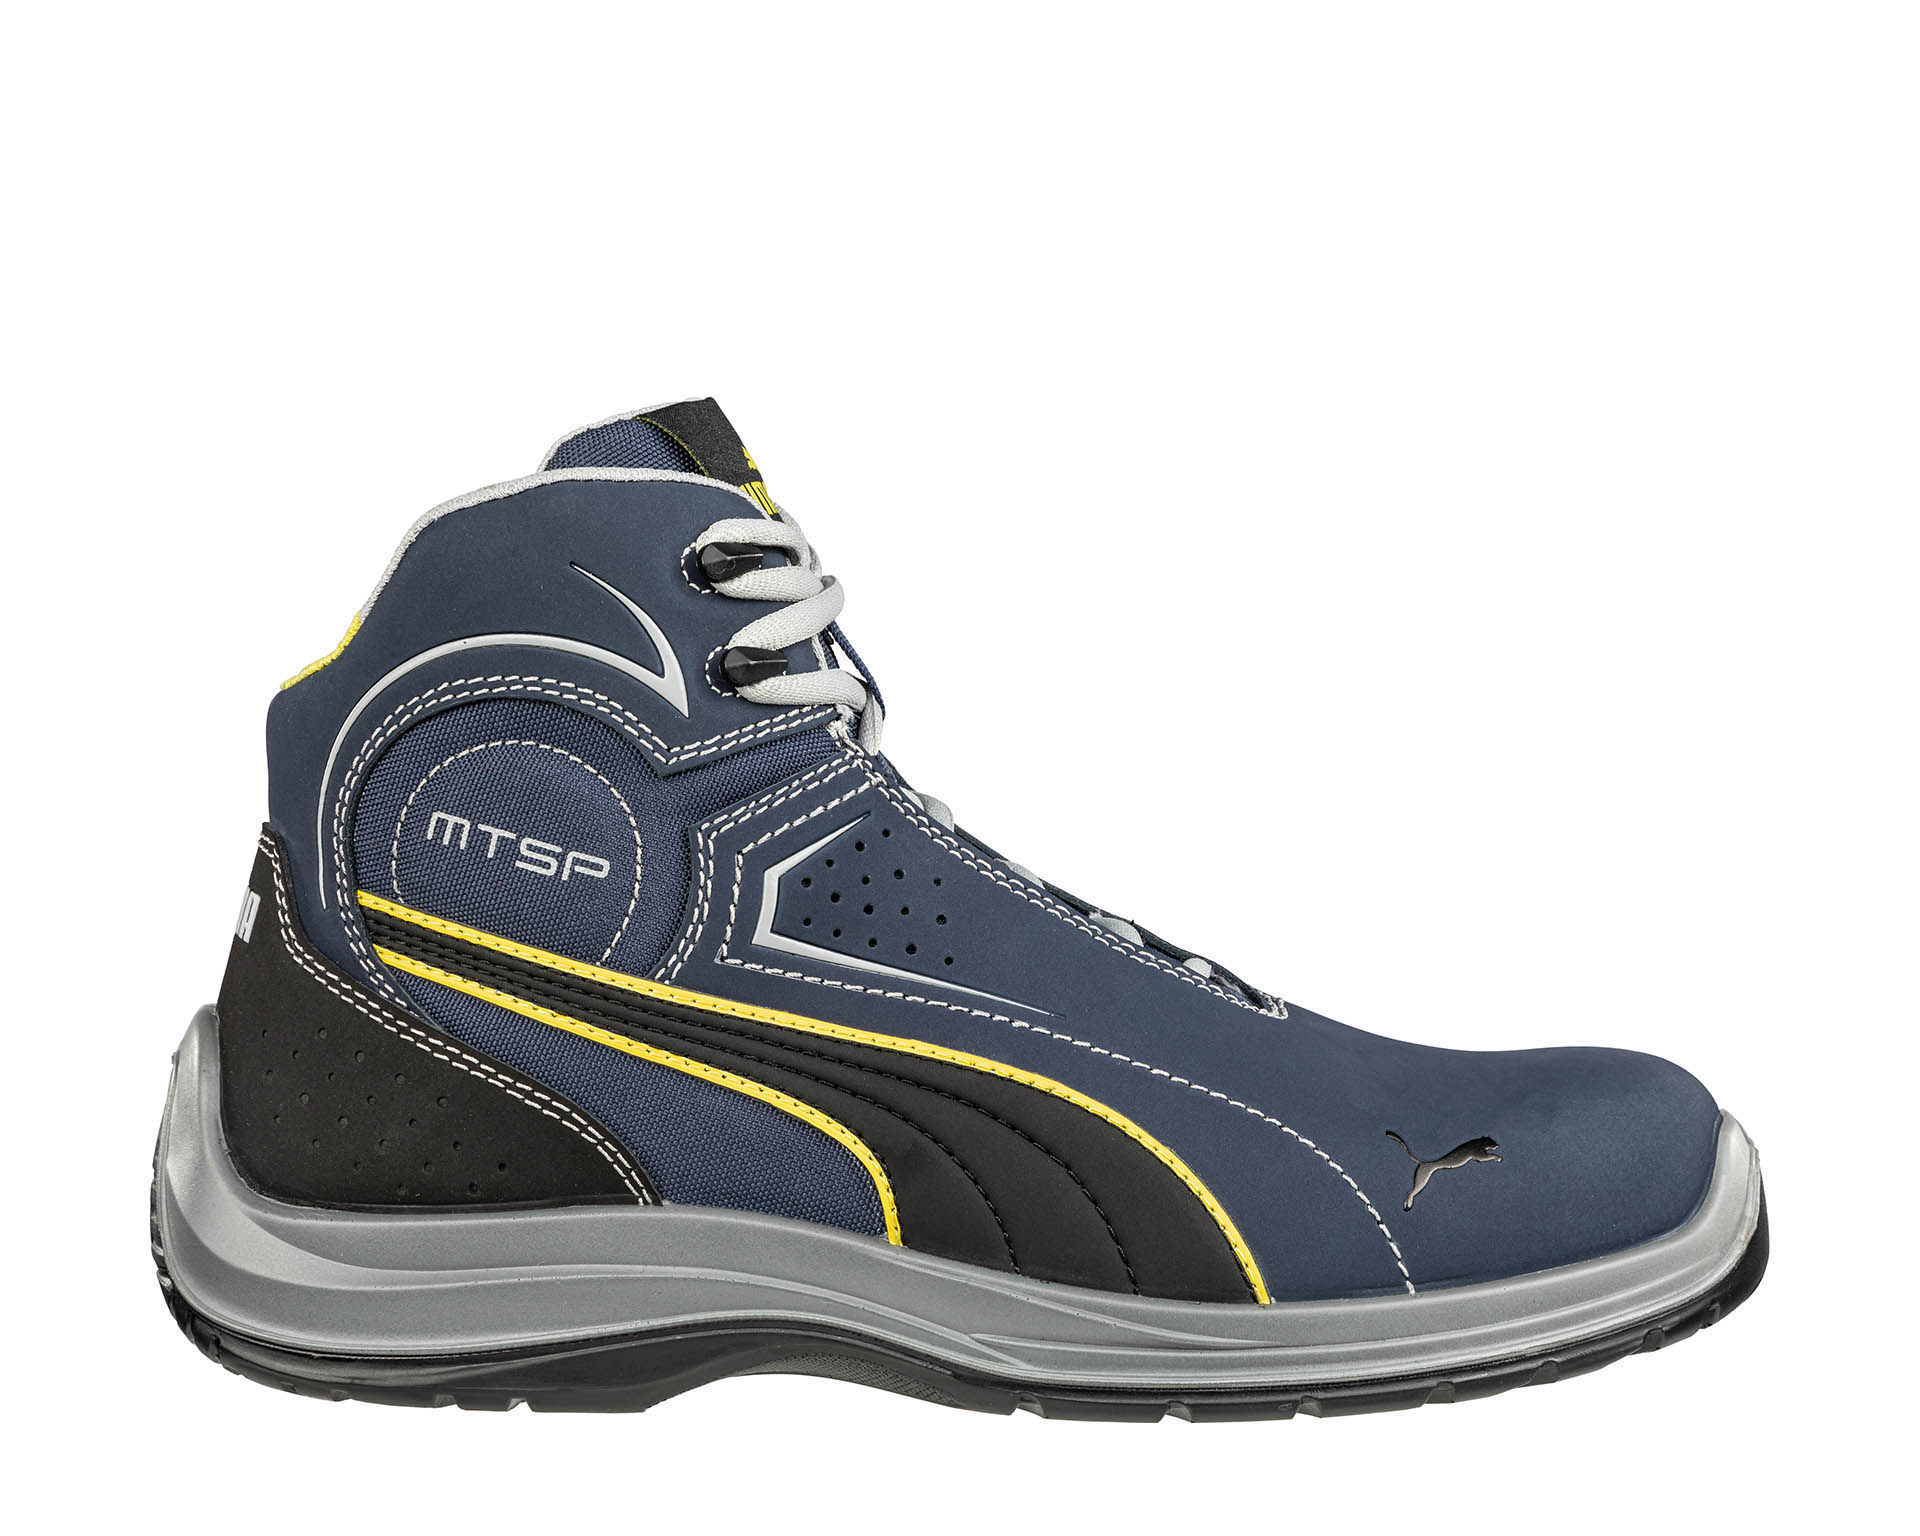 SR Puma TOURING work EH shoes Safety BLUE | USA ASTM MID|PUMA SAFETY